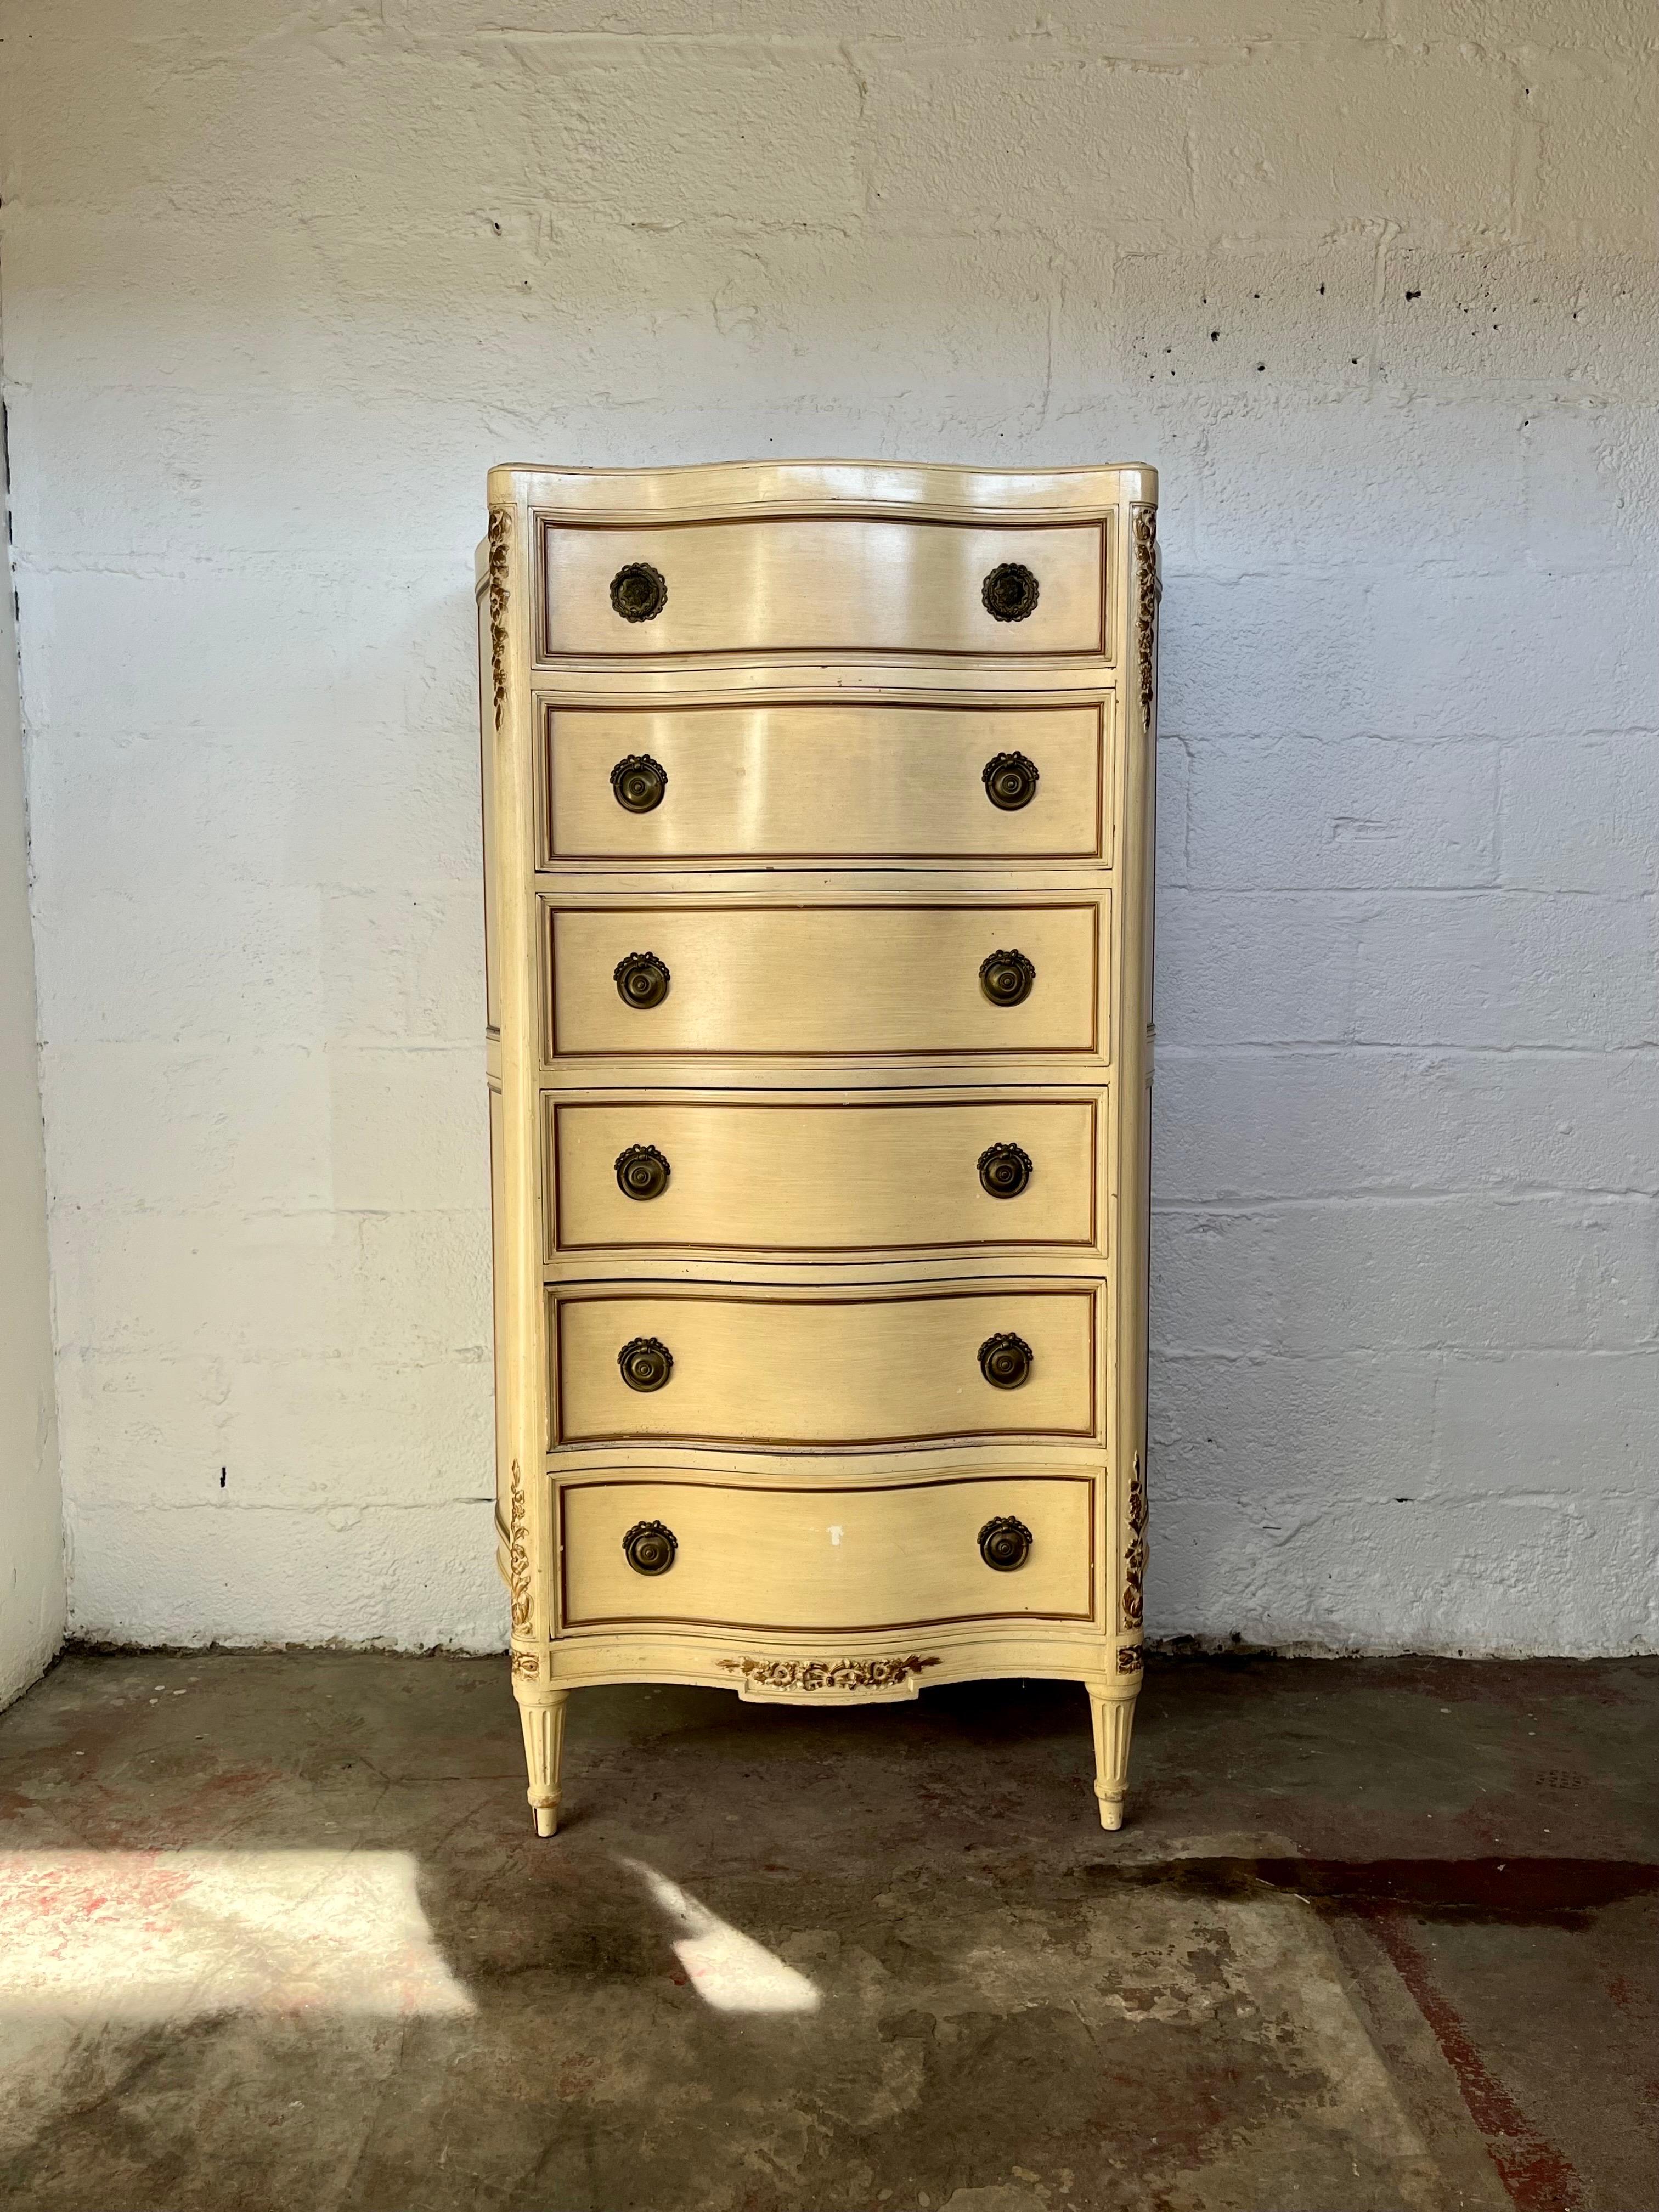 Spectacular chest of drawers in the Louis XVI style. Beautiful lines with demilune profile. Laurel wreath drawer pulls and carved draped floral accents.
Curbside to NYC/Philly $450